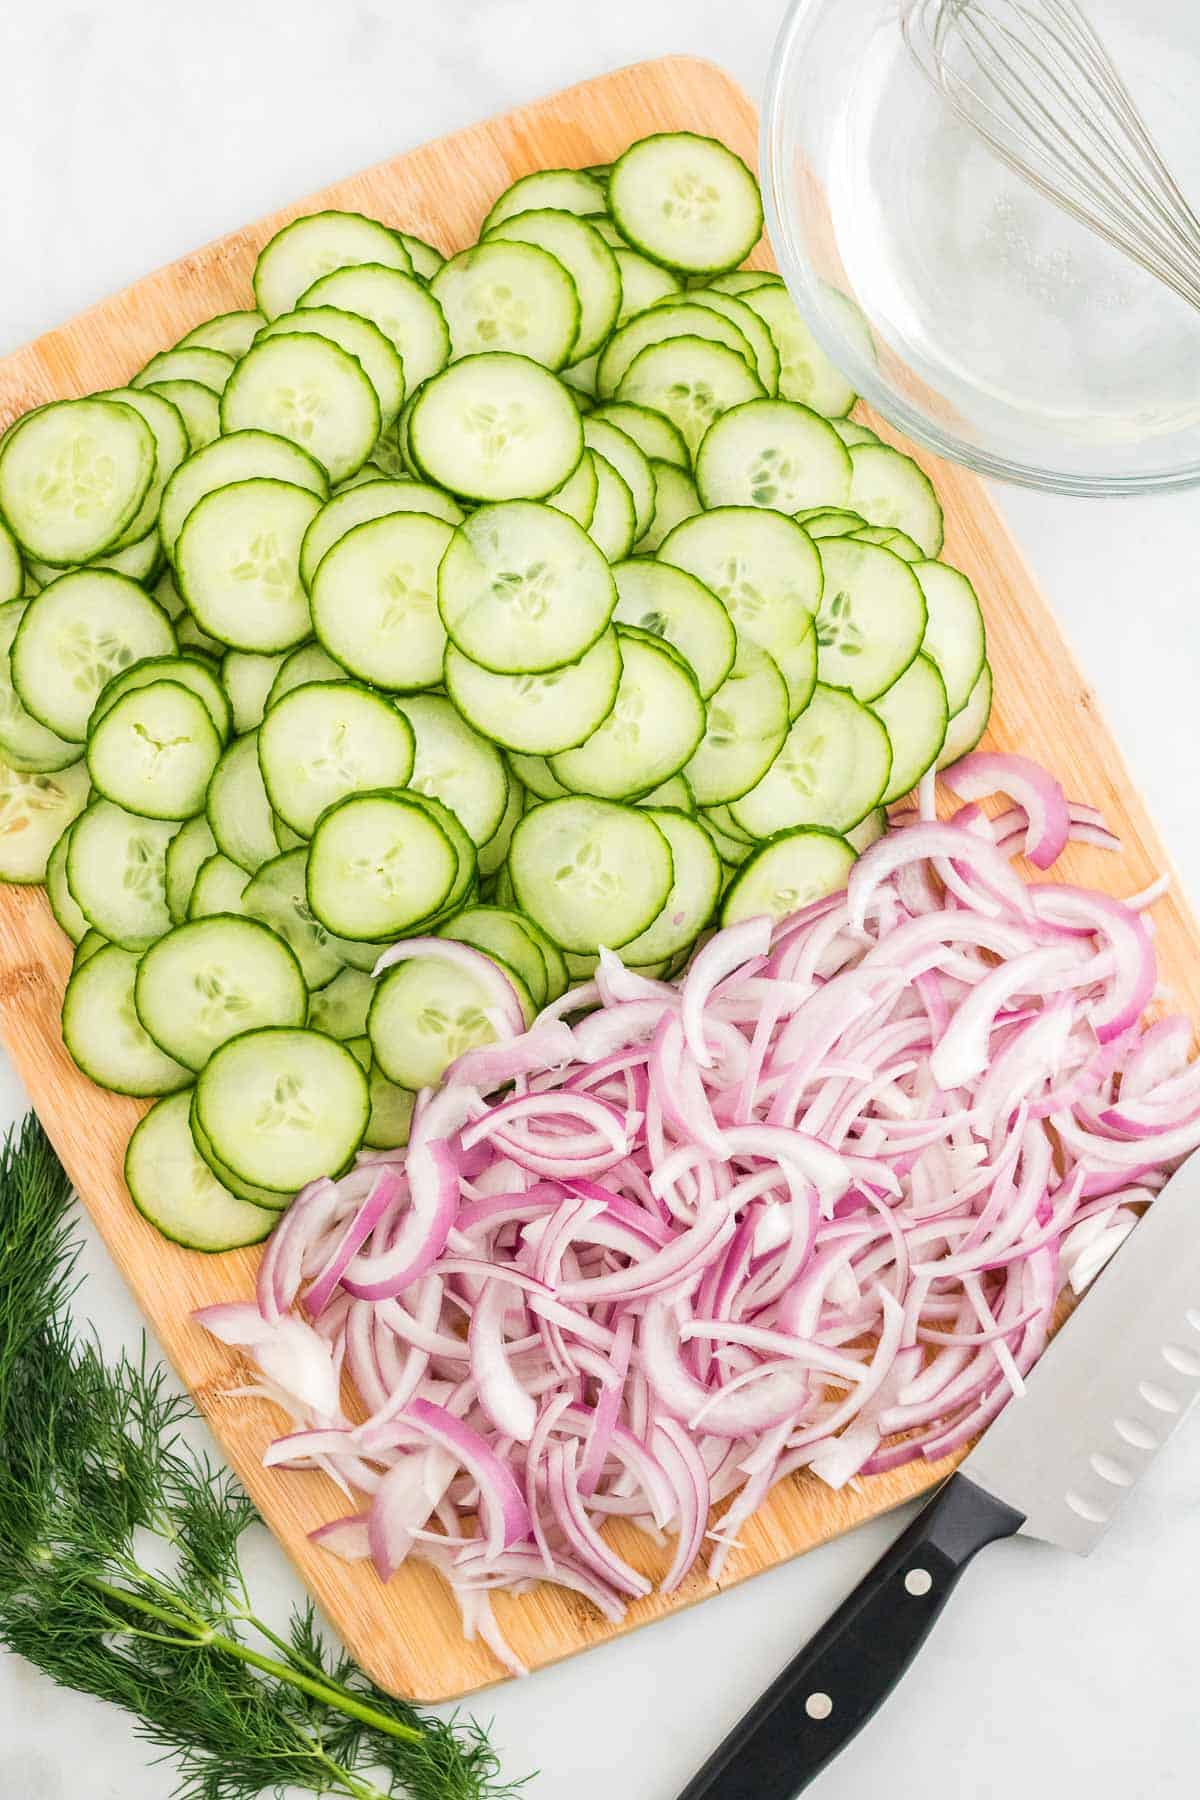 sliced onions and cucumbers on a cutting board.